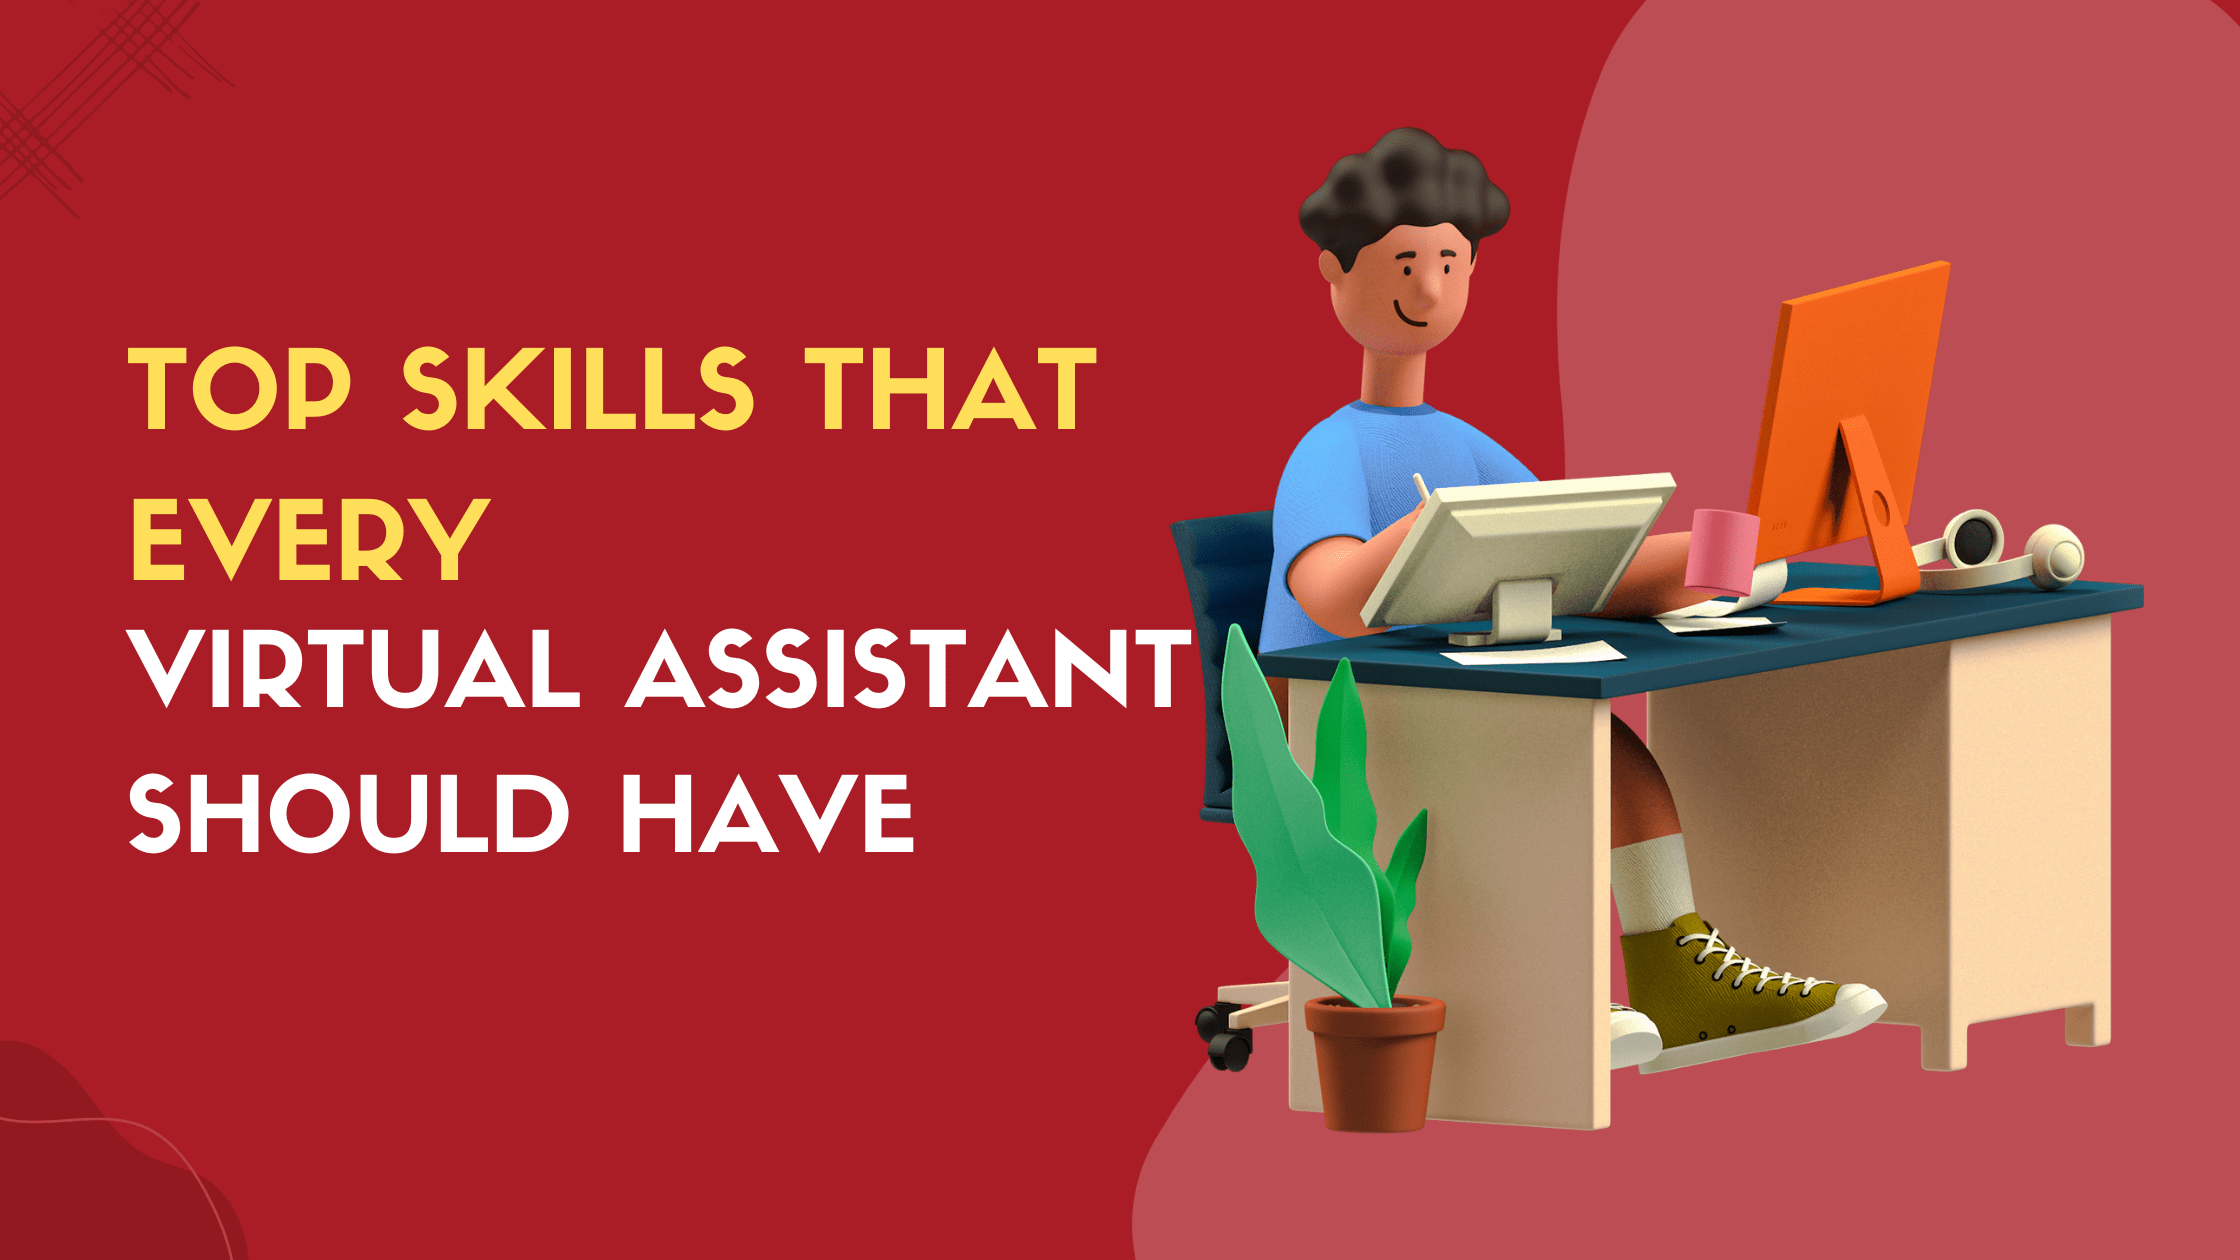 Top Skills that Every Virtual Assistant Should Have